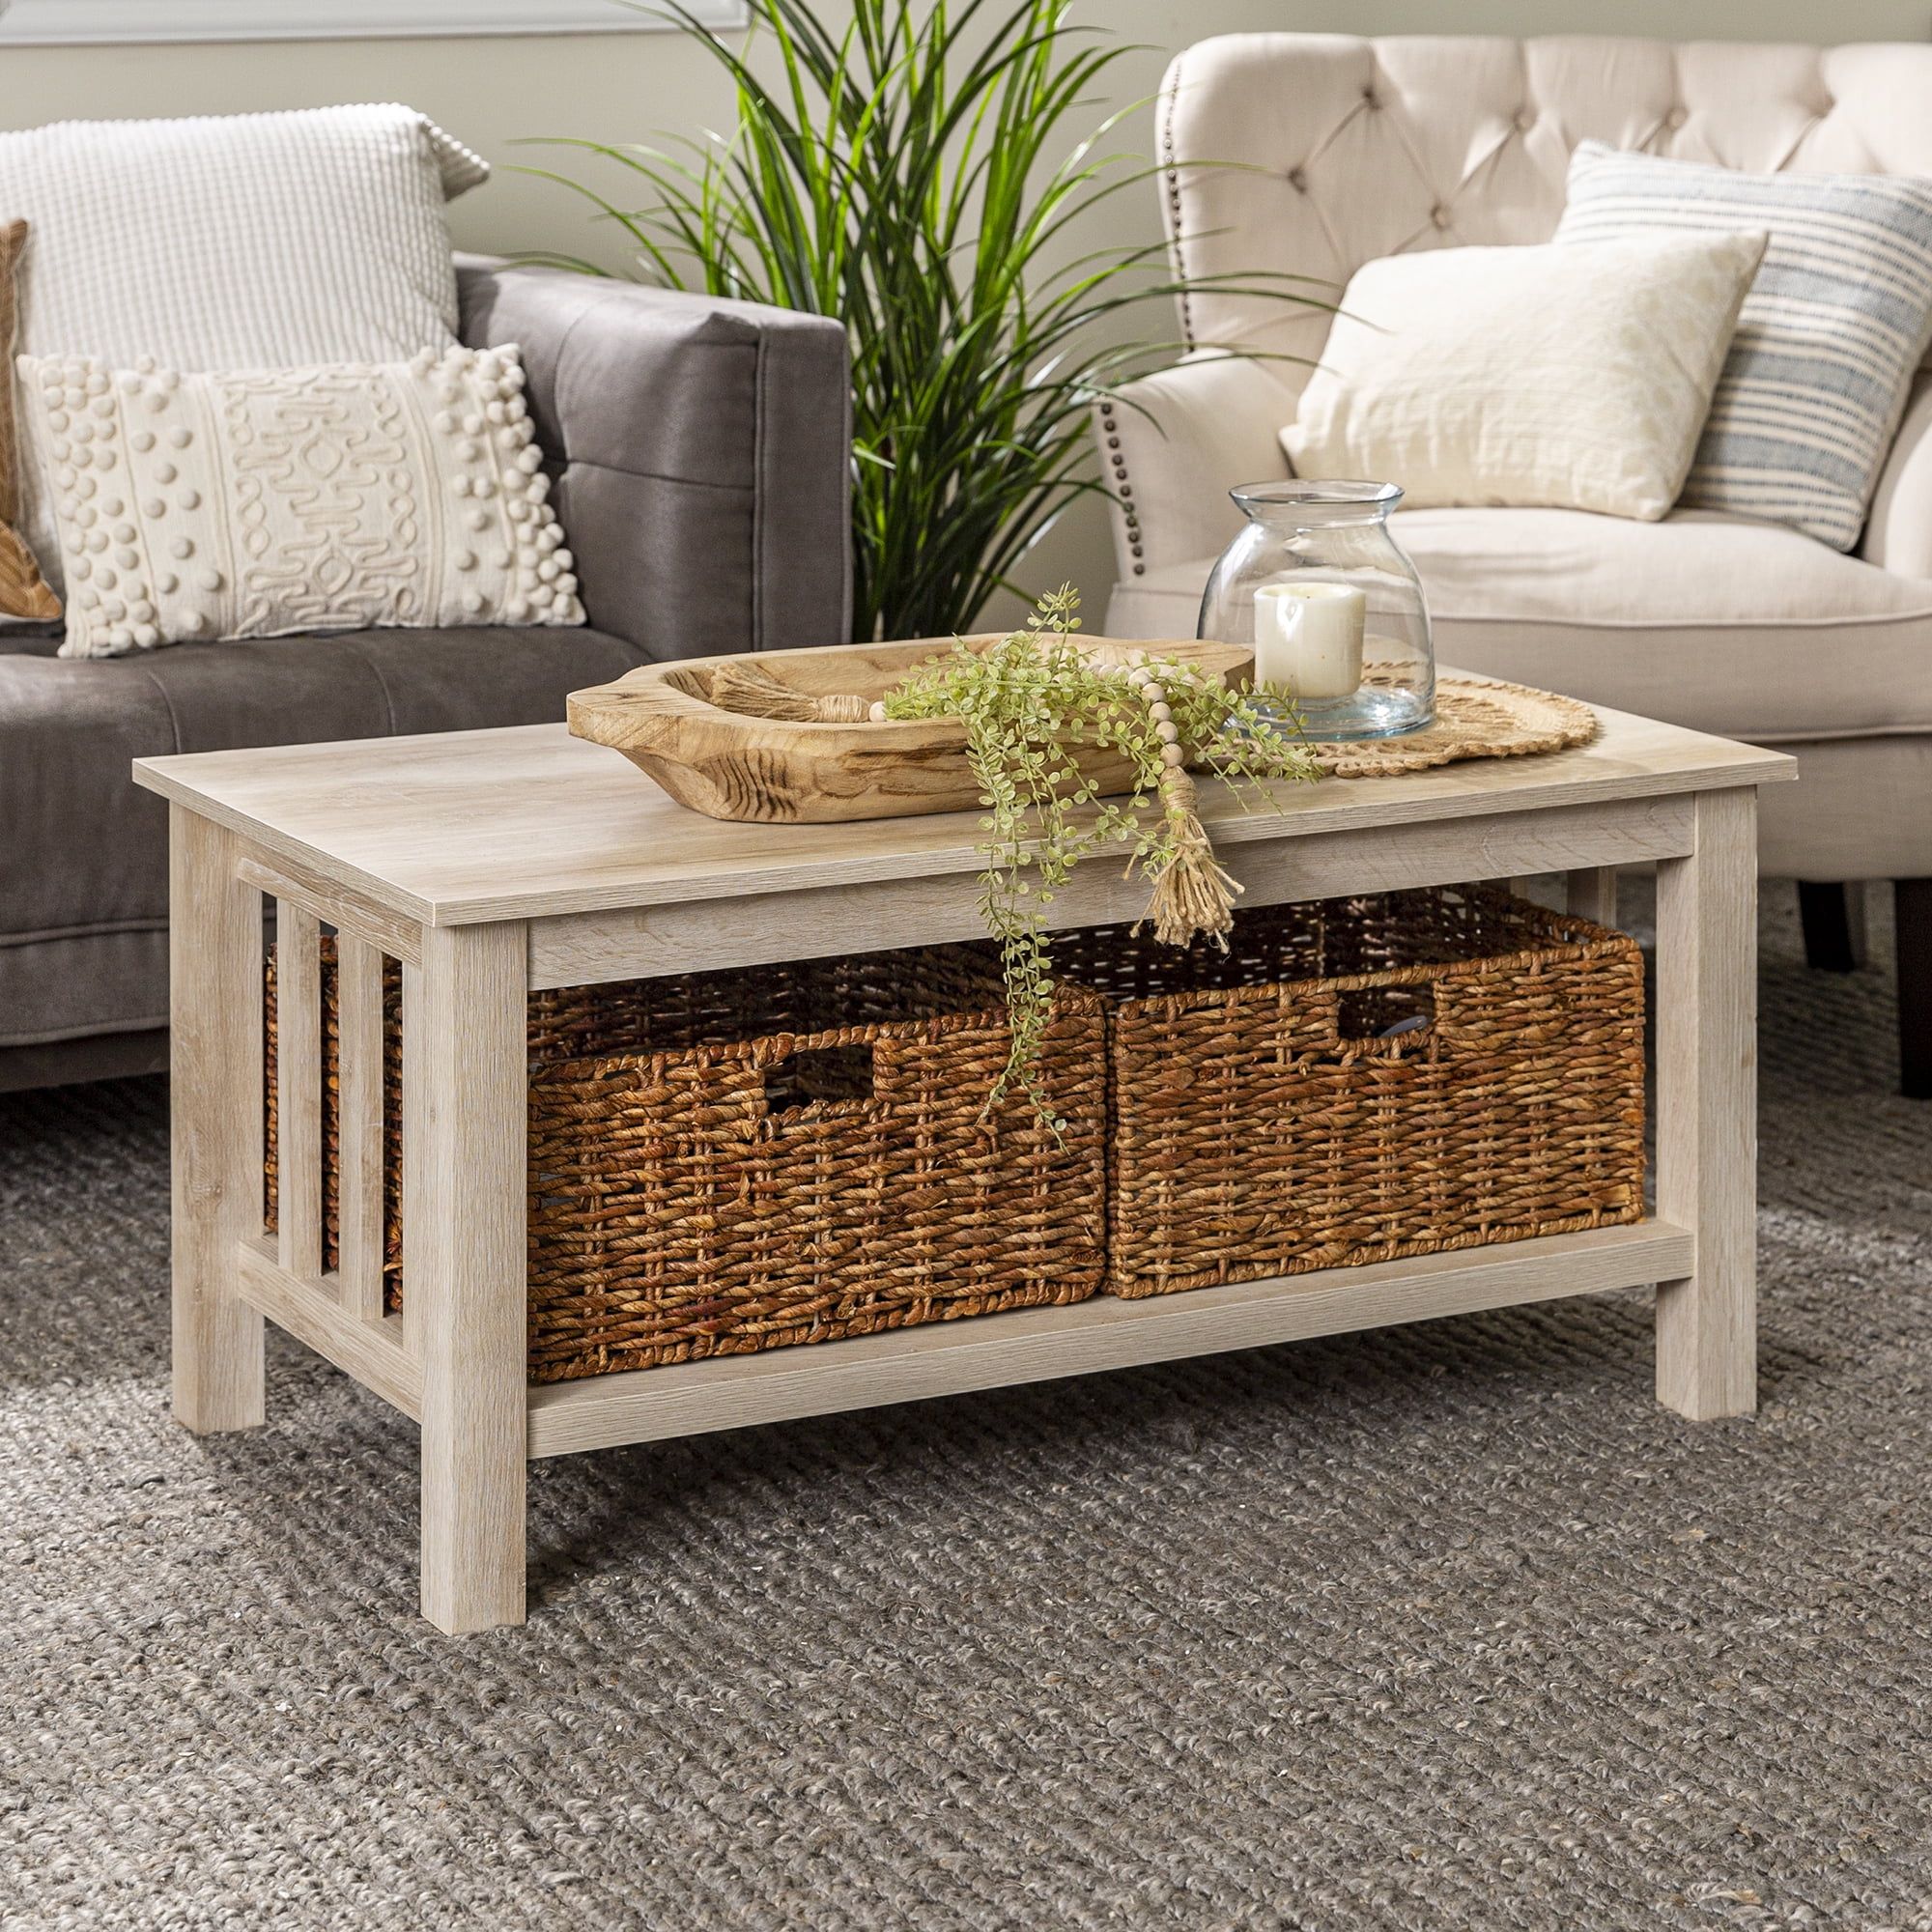 Woven Paths Traditional Storage Coffee Table With Bins, White Oak Intended For Woven Paths Coffee Tables (View 3 of 15)